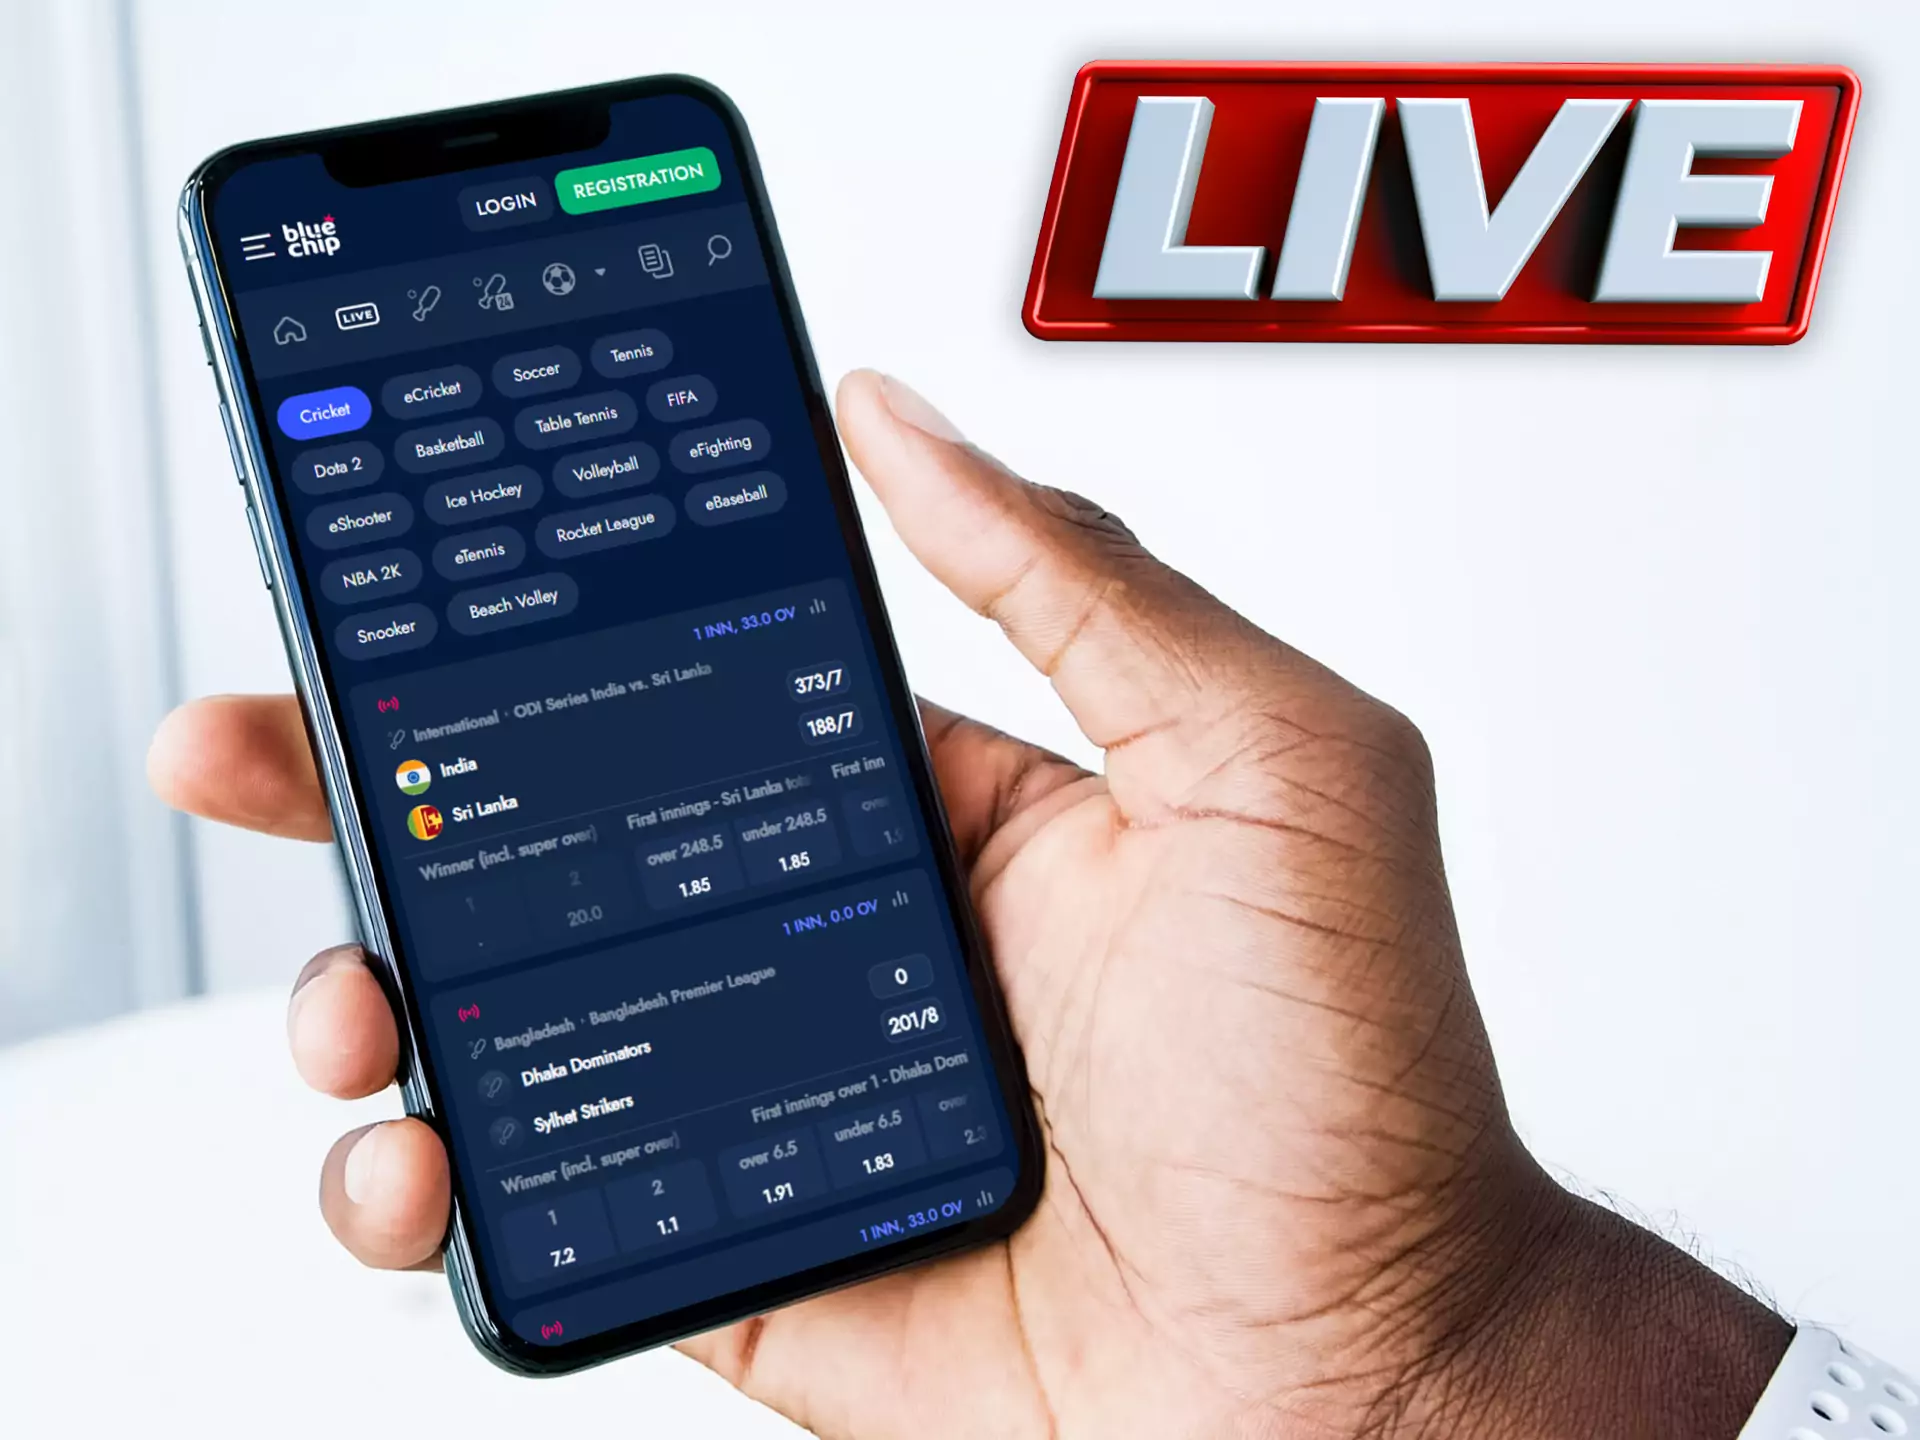 Cricket betting apps support live betting.